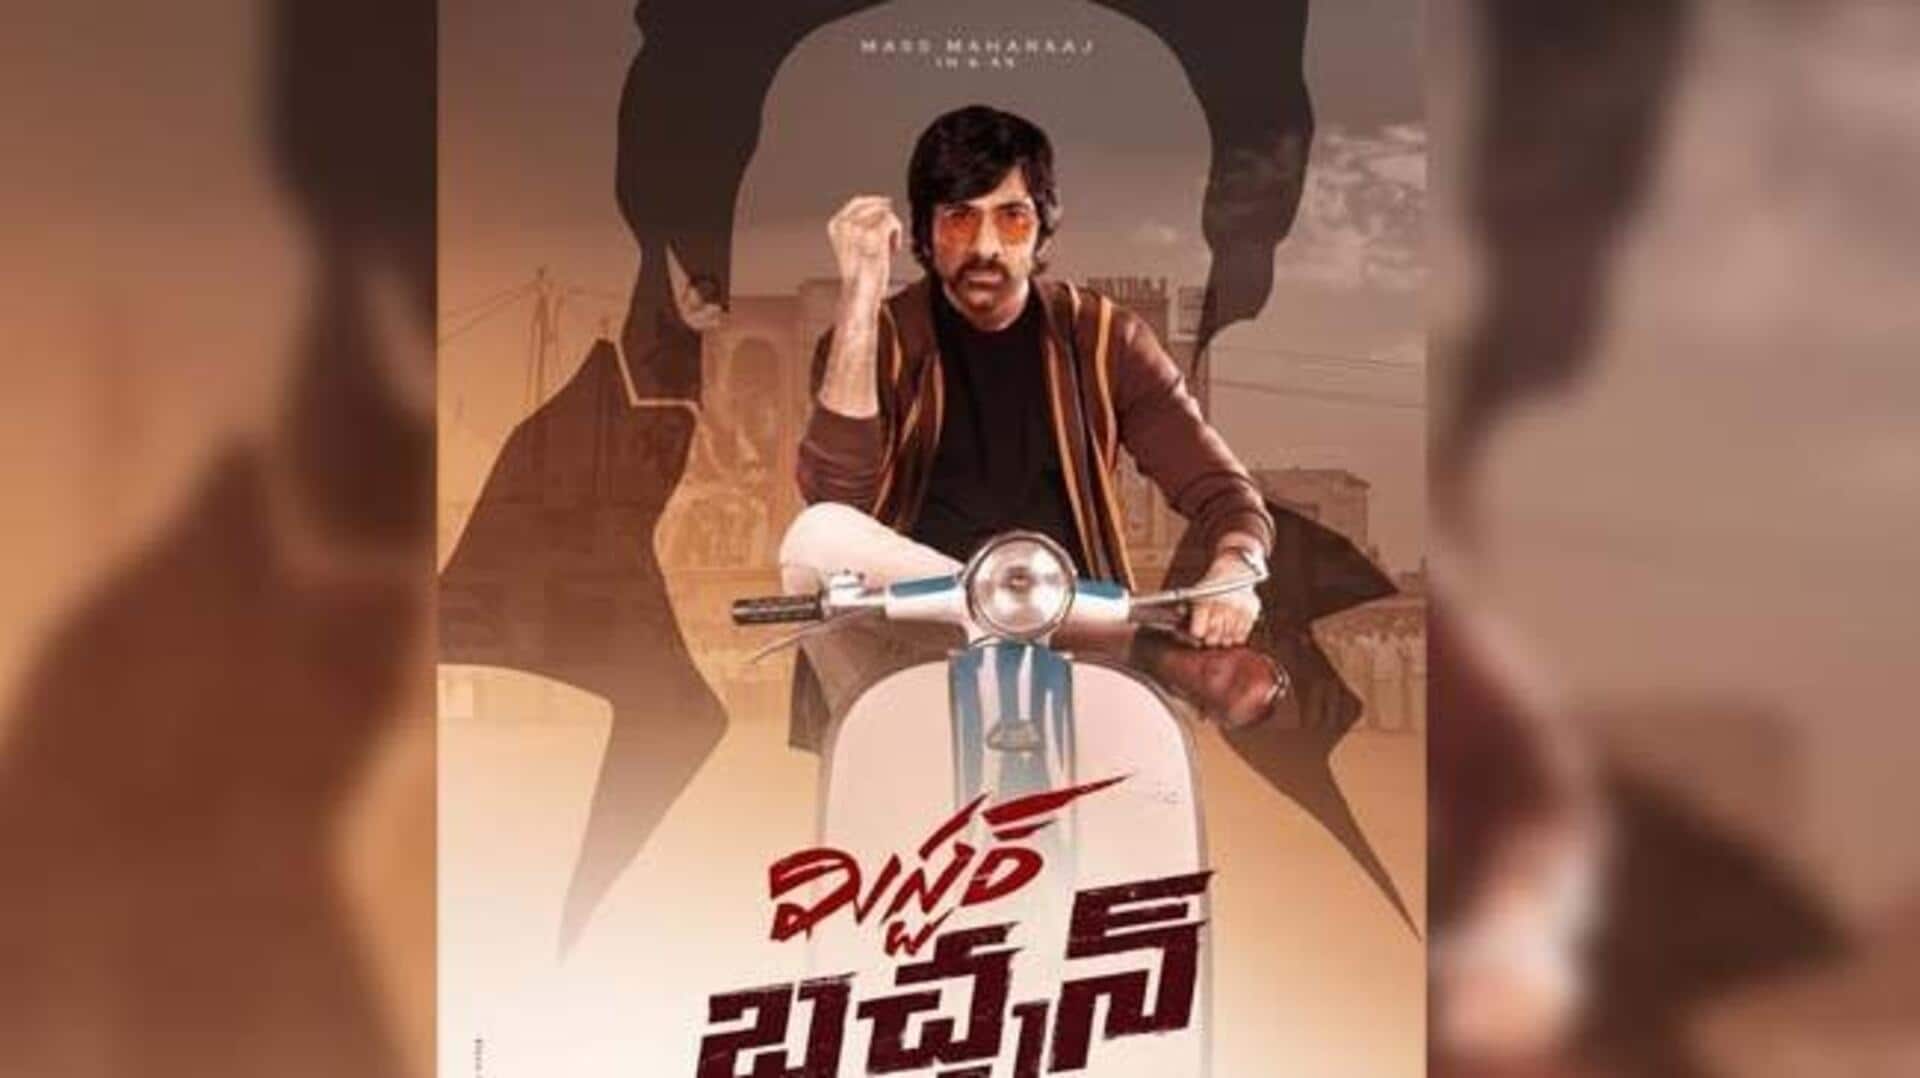 Ravi Teja unveils poster of his next, titled 'Mr Bachchan'